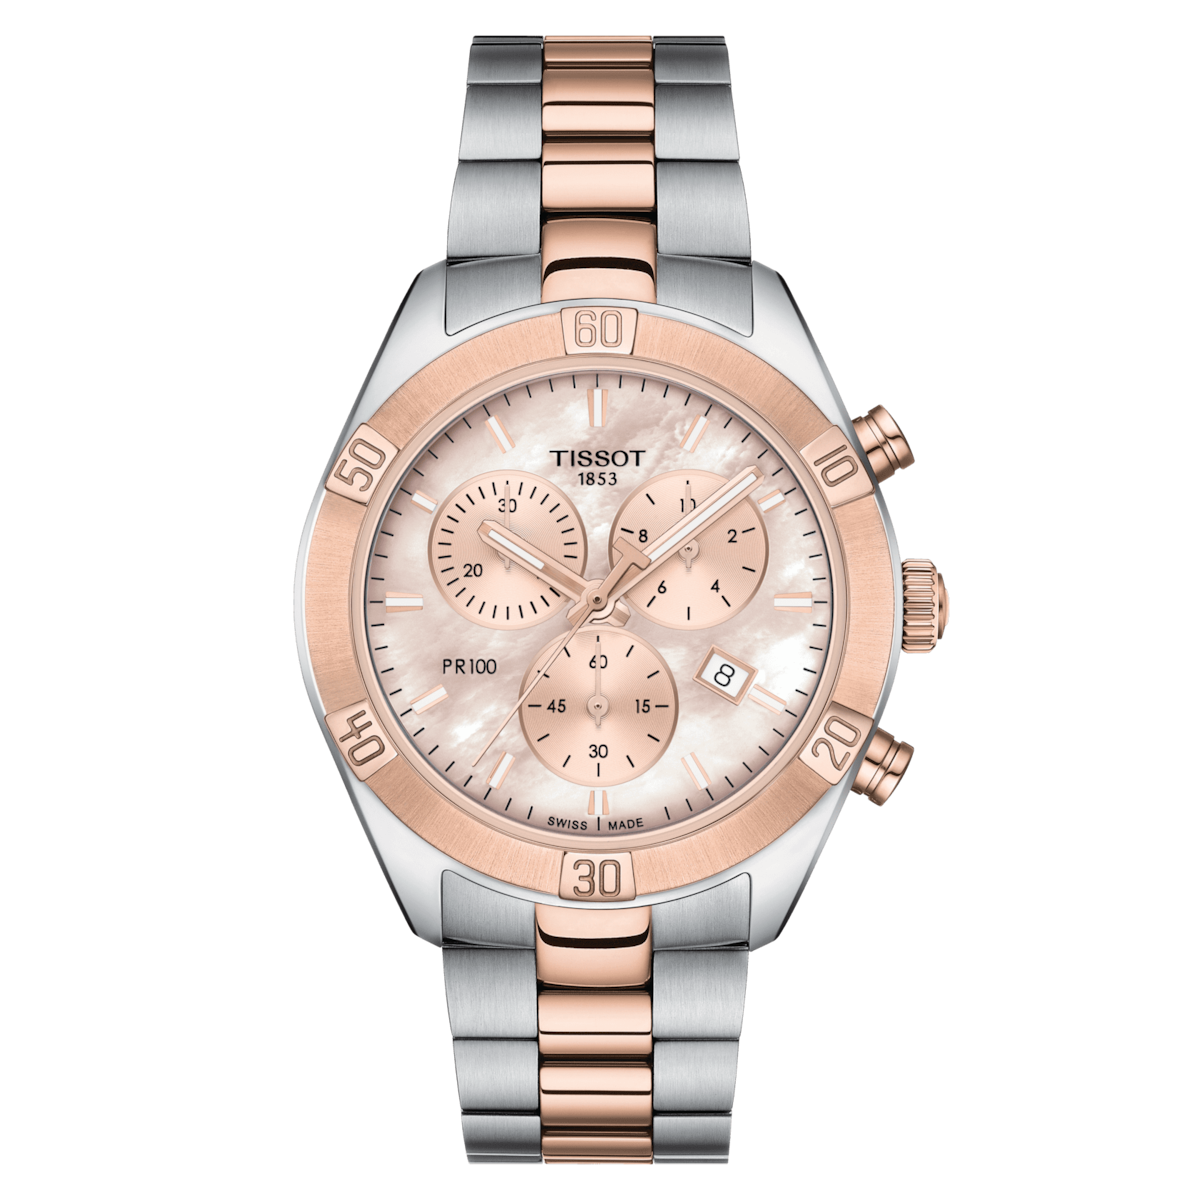 T-Classic PR 100 Sport Chic Chronograph pink mother-of-pearl